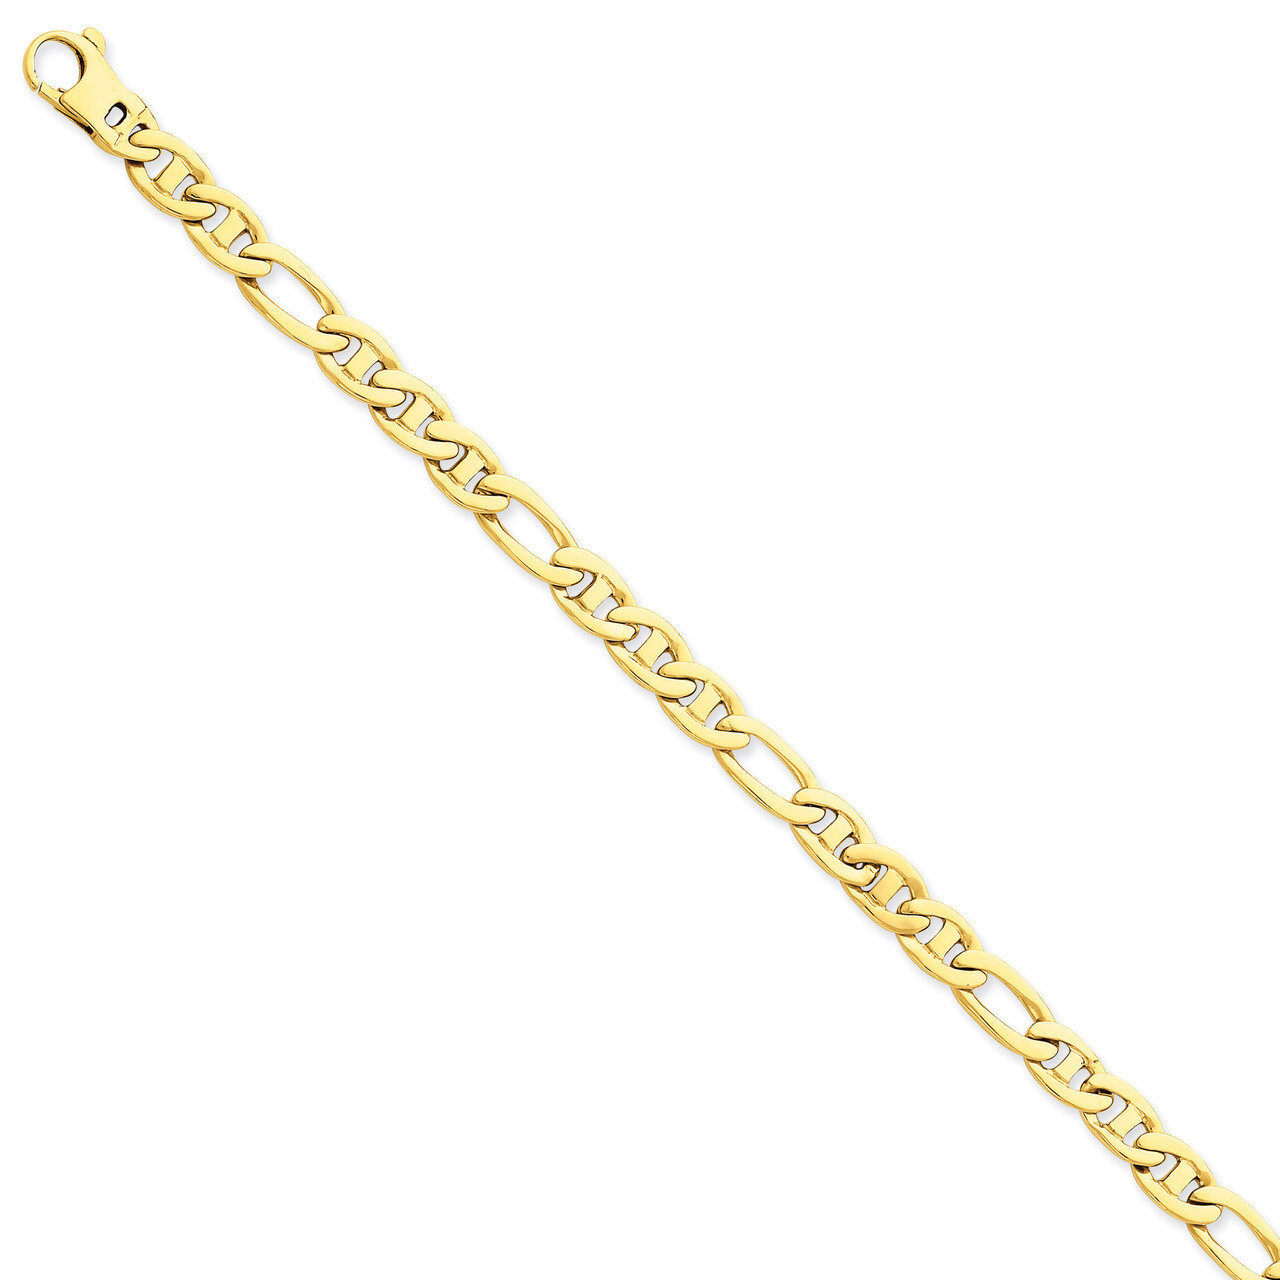 6.5mm Solid Hand-Polished 3 & 1 Flat Anchor Chain 24 Inch 14k Gold FL438-24